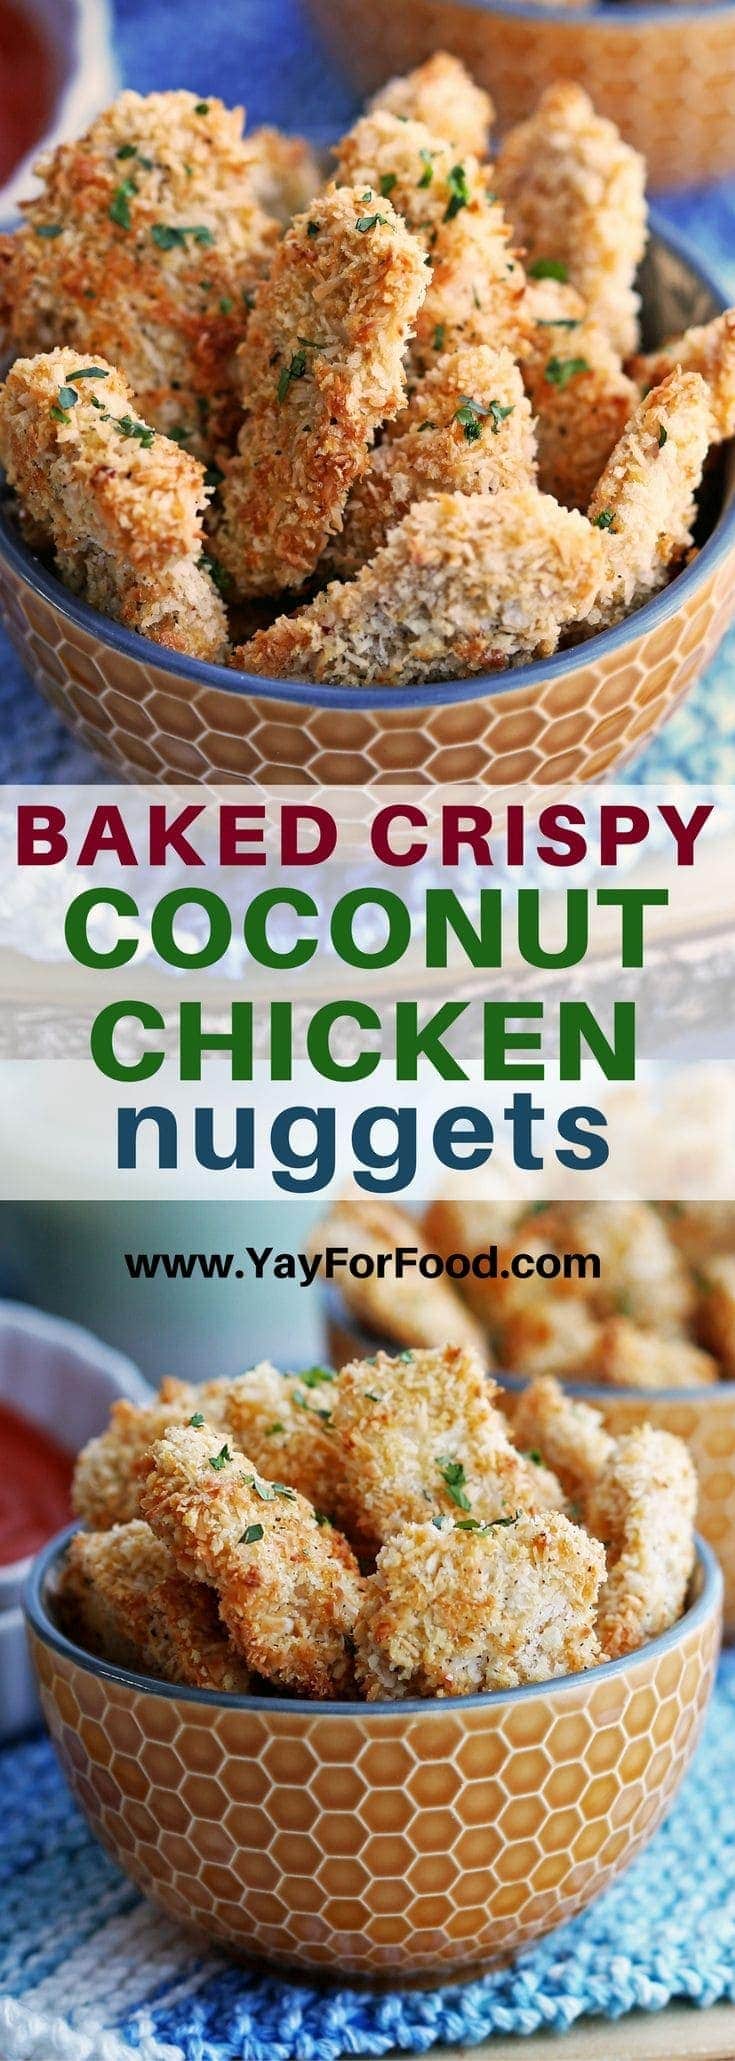 Baked Crispy Coconut Chicken Nuggets - Yay! For Food